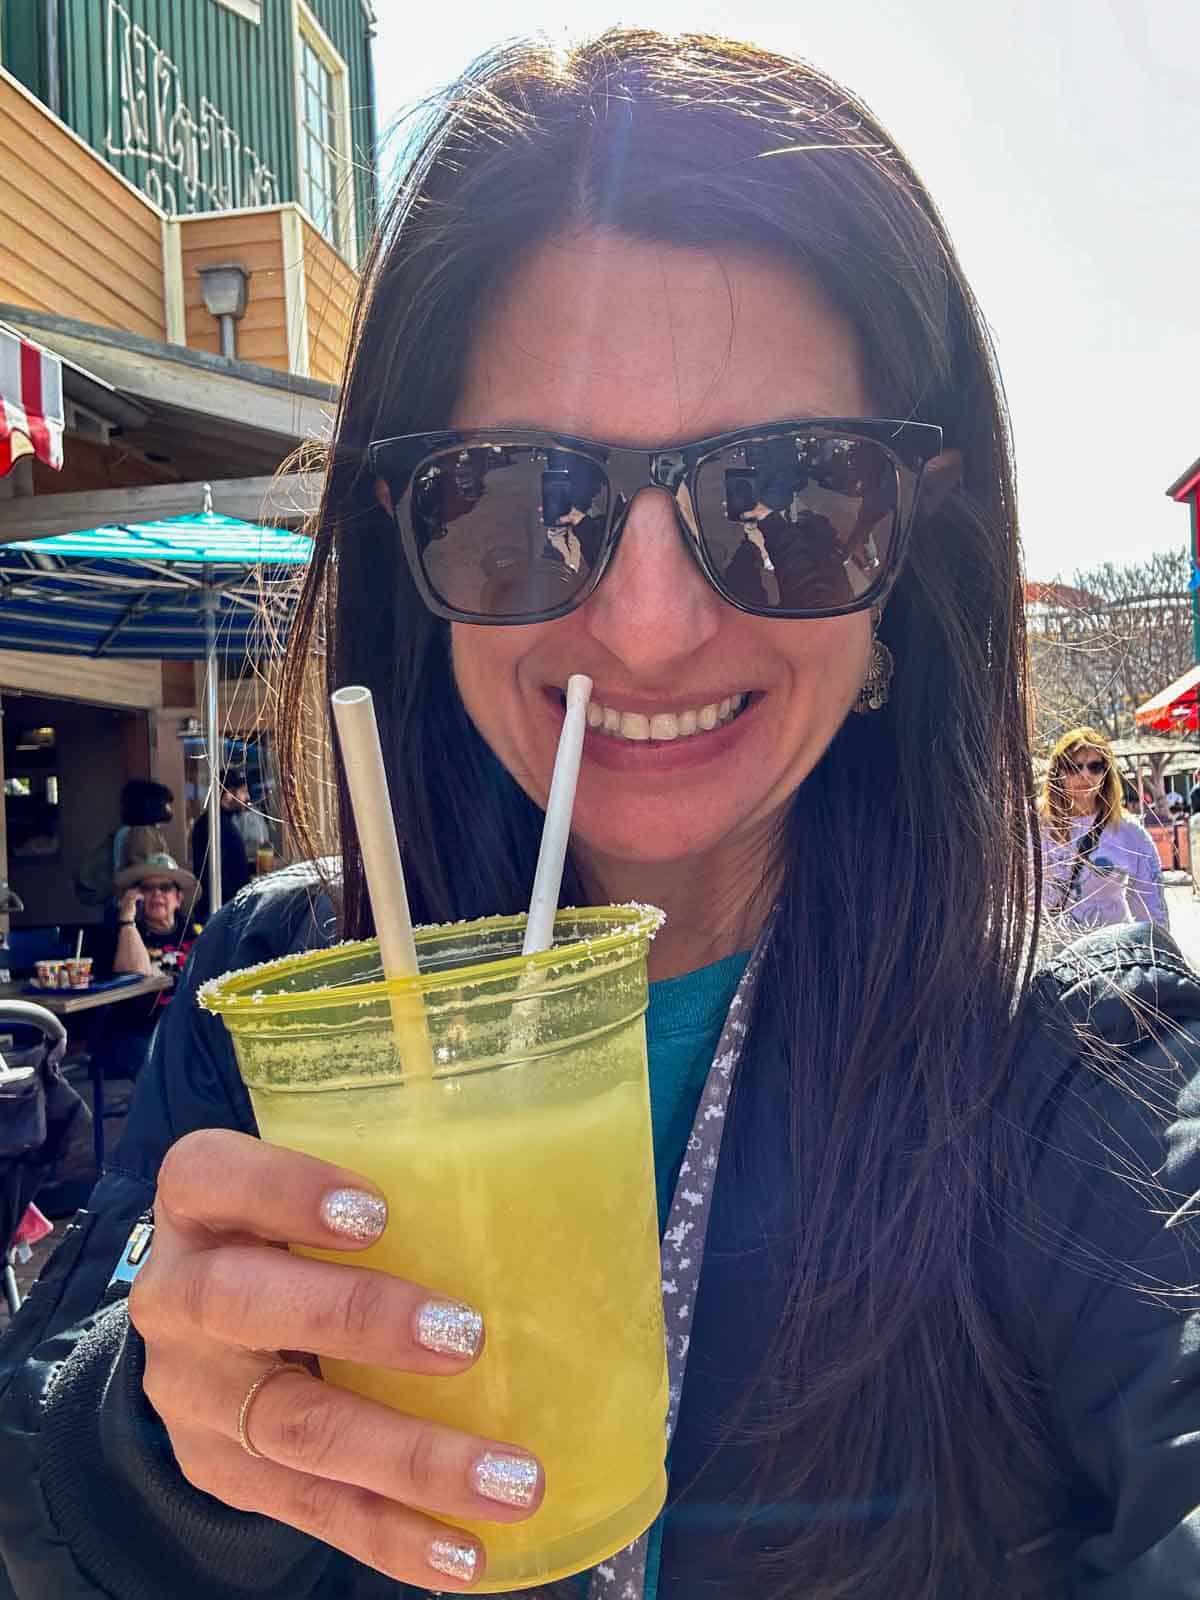 A woman with long brown hair holding a yellow plastic cup with two straws and a frozen margarita inside.